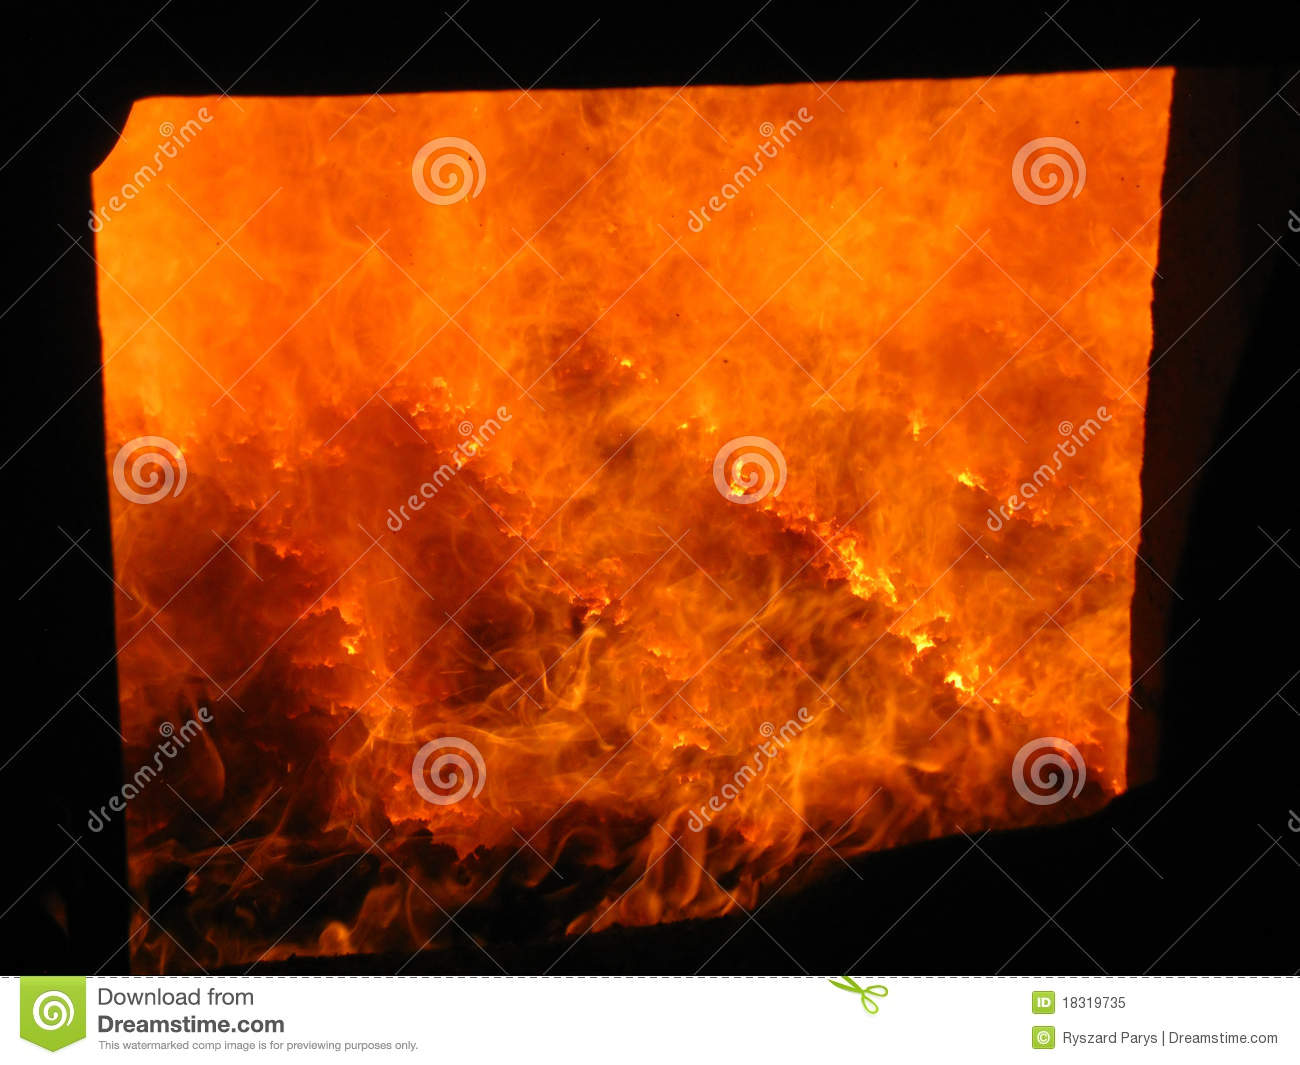 Coal Fire Grate Boiler Royalty Free Stock Photo   Image  18319735